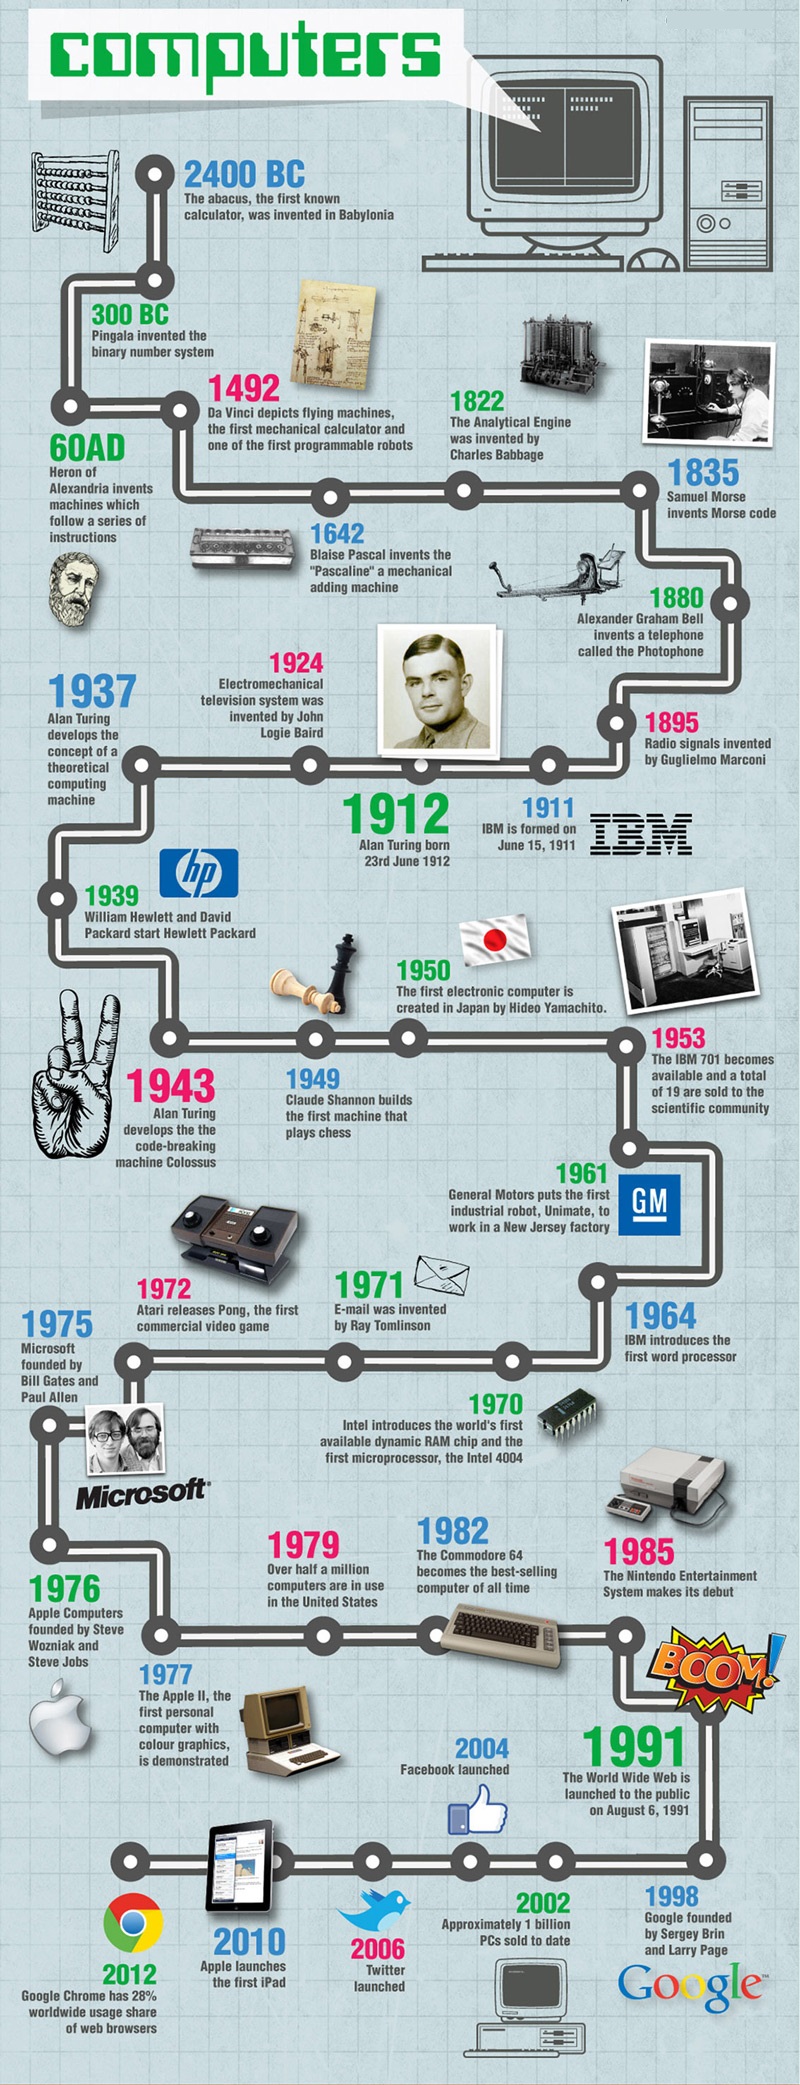 History and evolution of computers